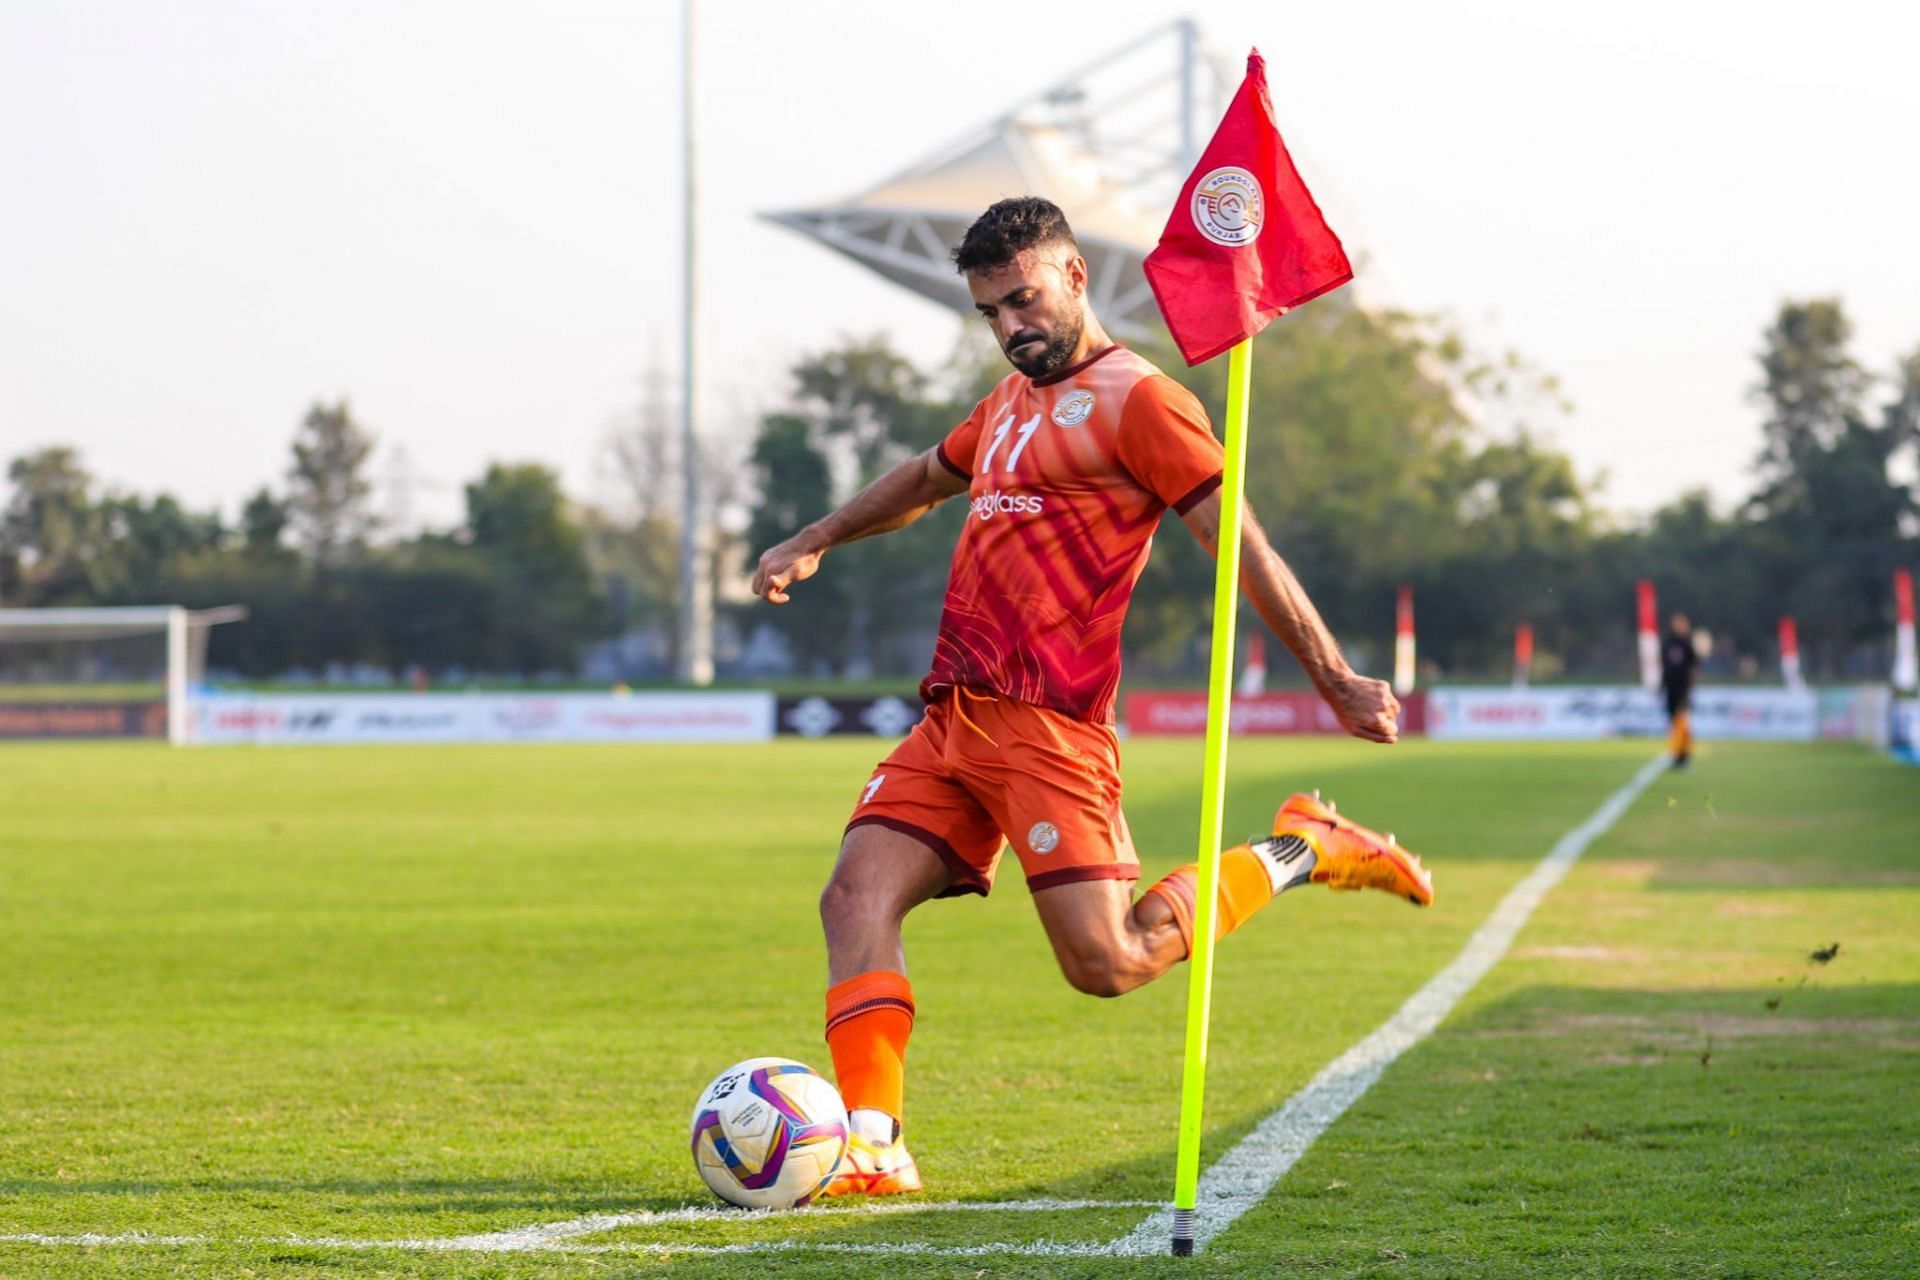 Juan Mera scored his first-ever hattrick in the I-League on Sunday.